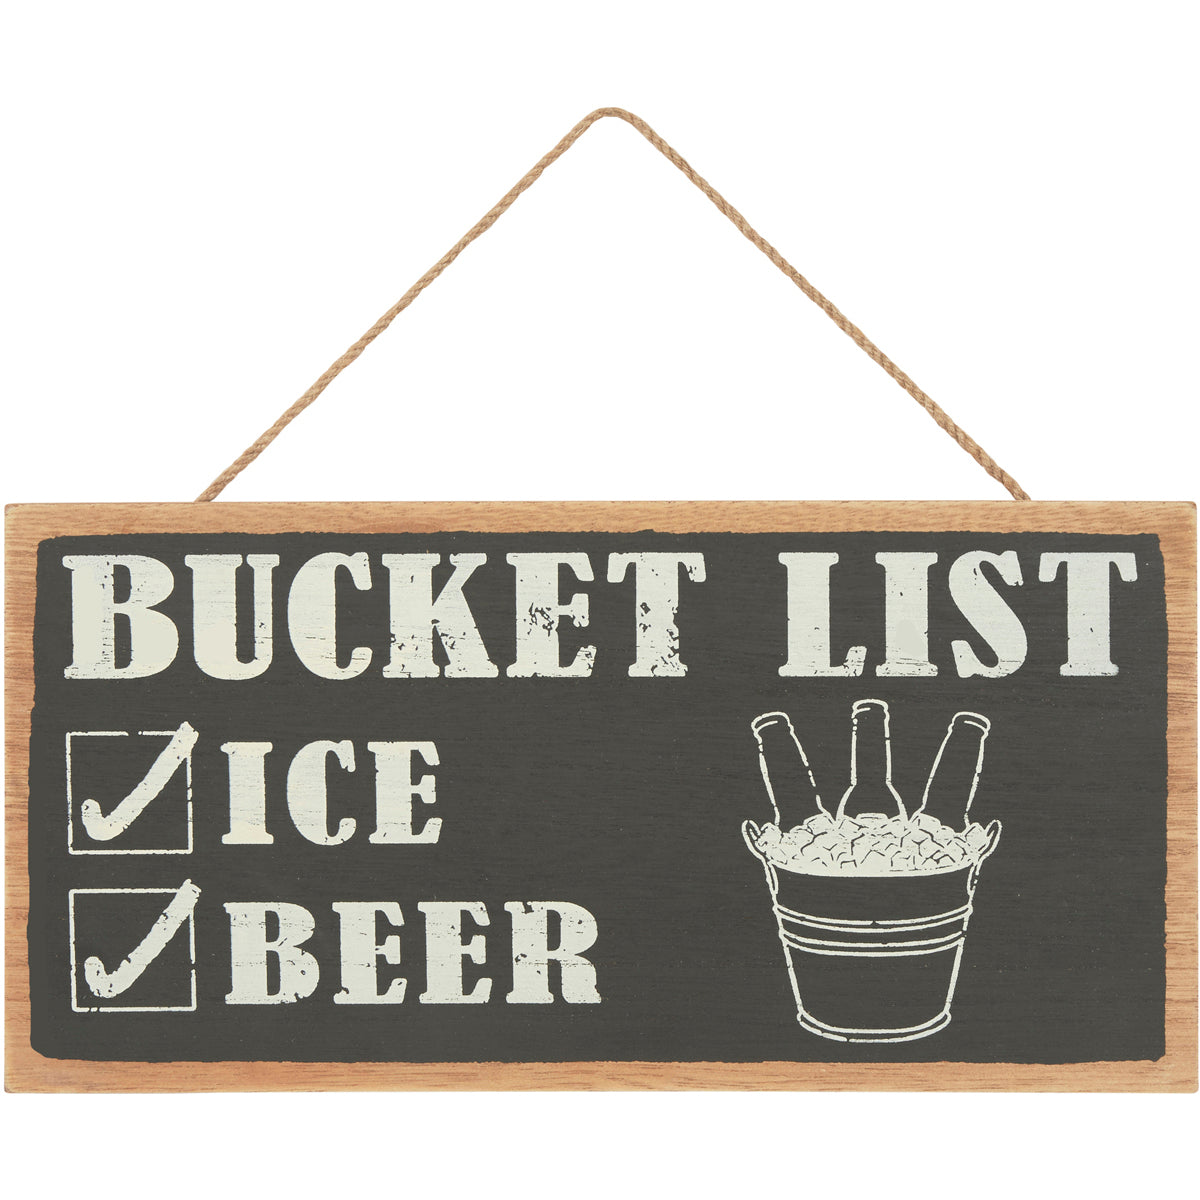 Wooden sign featuring Bucket List fun design. Beer and ice ticked off the list.